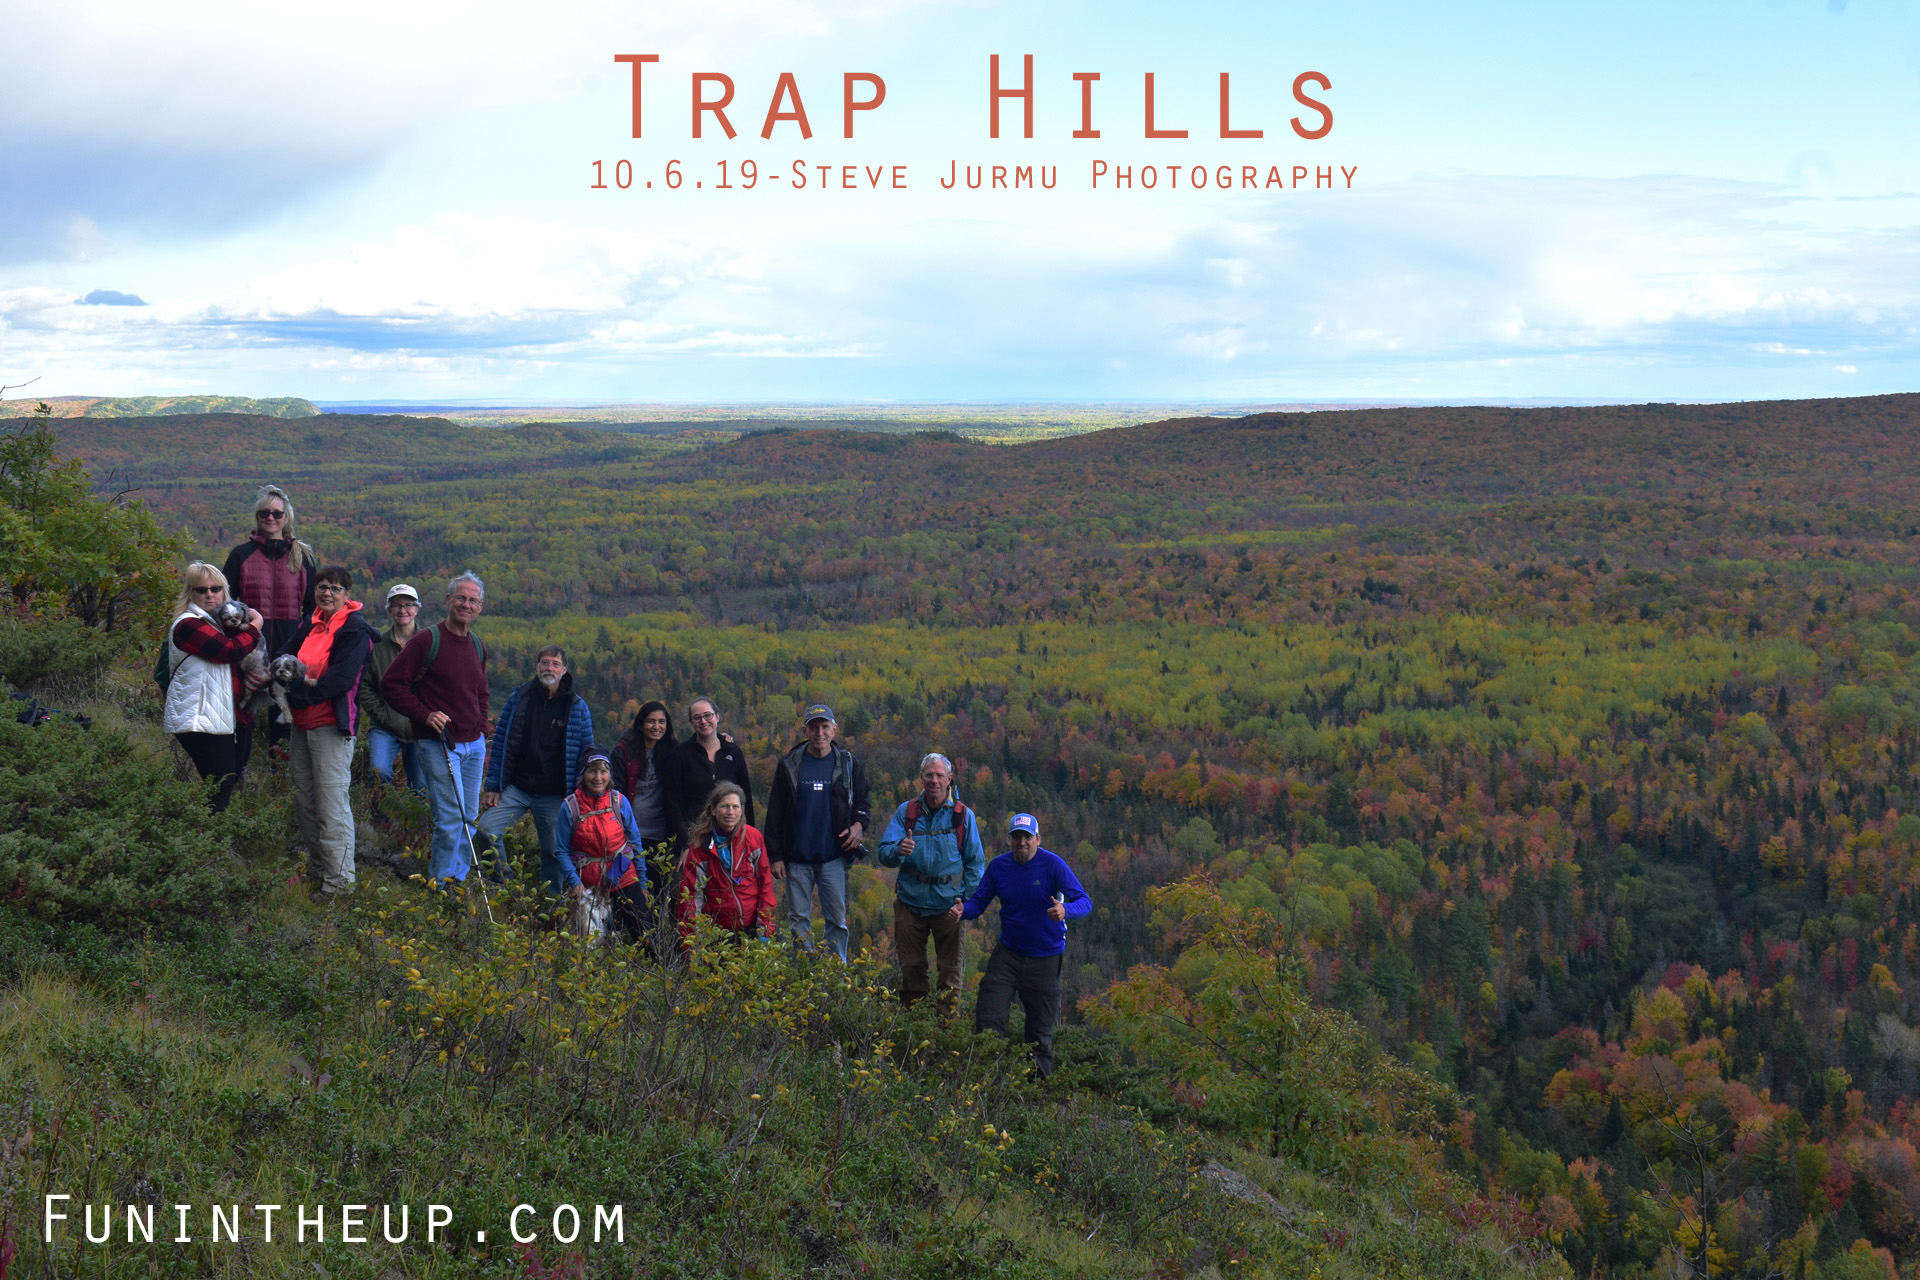 Trap hills hacking site fall colors